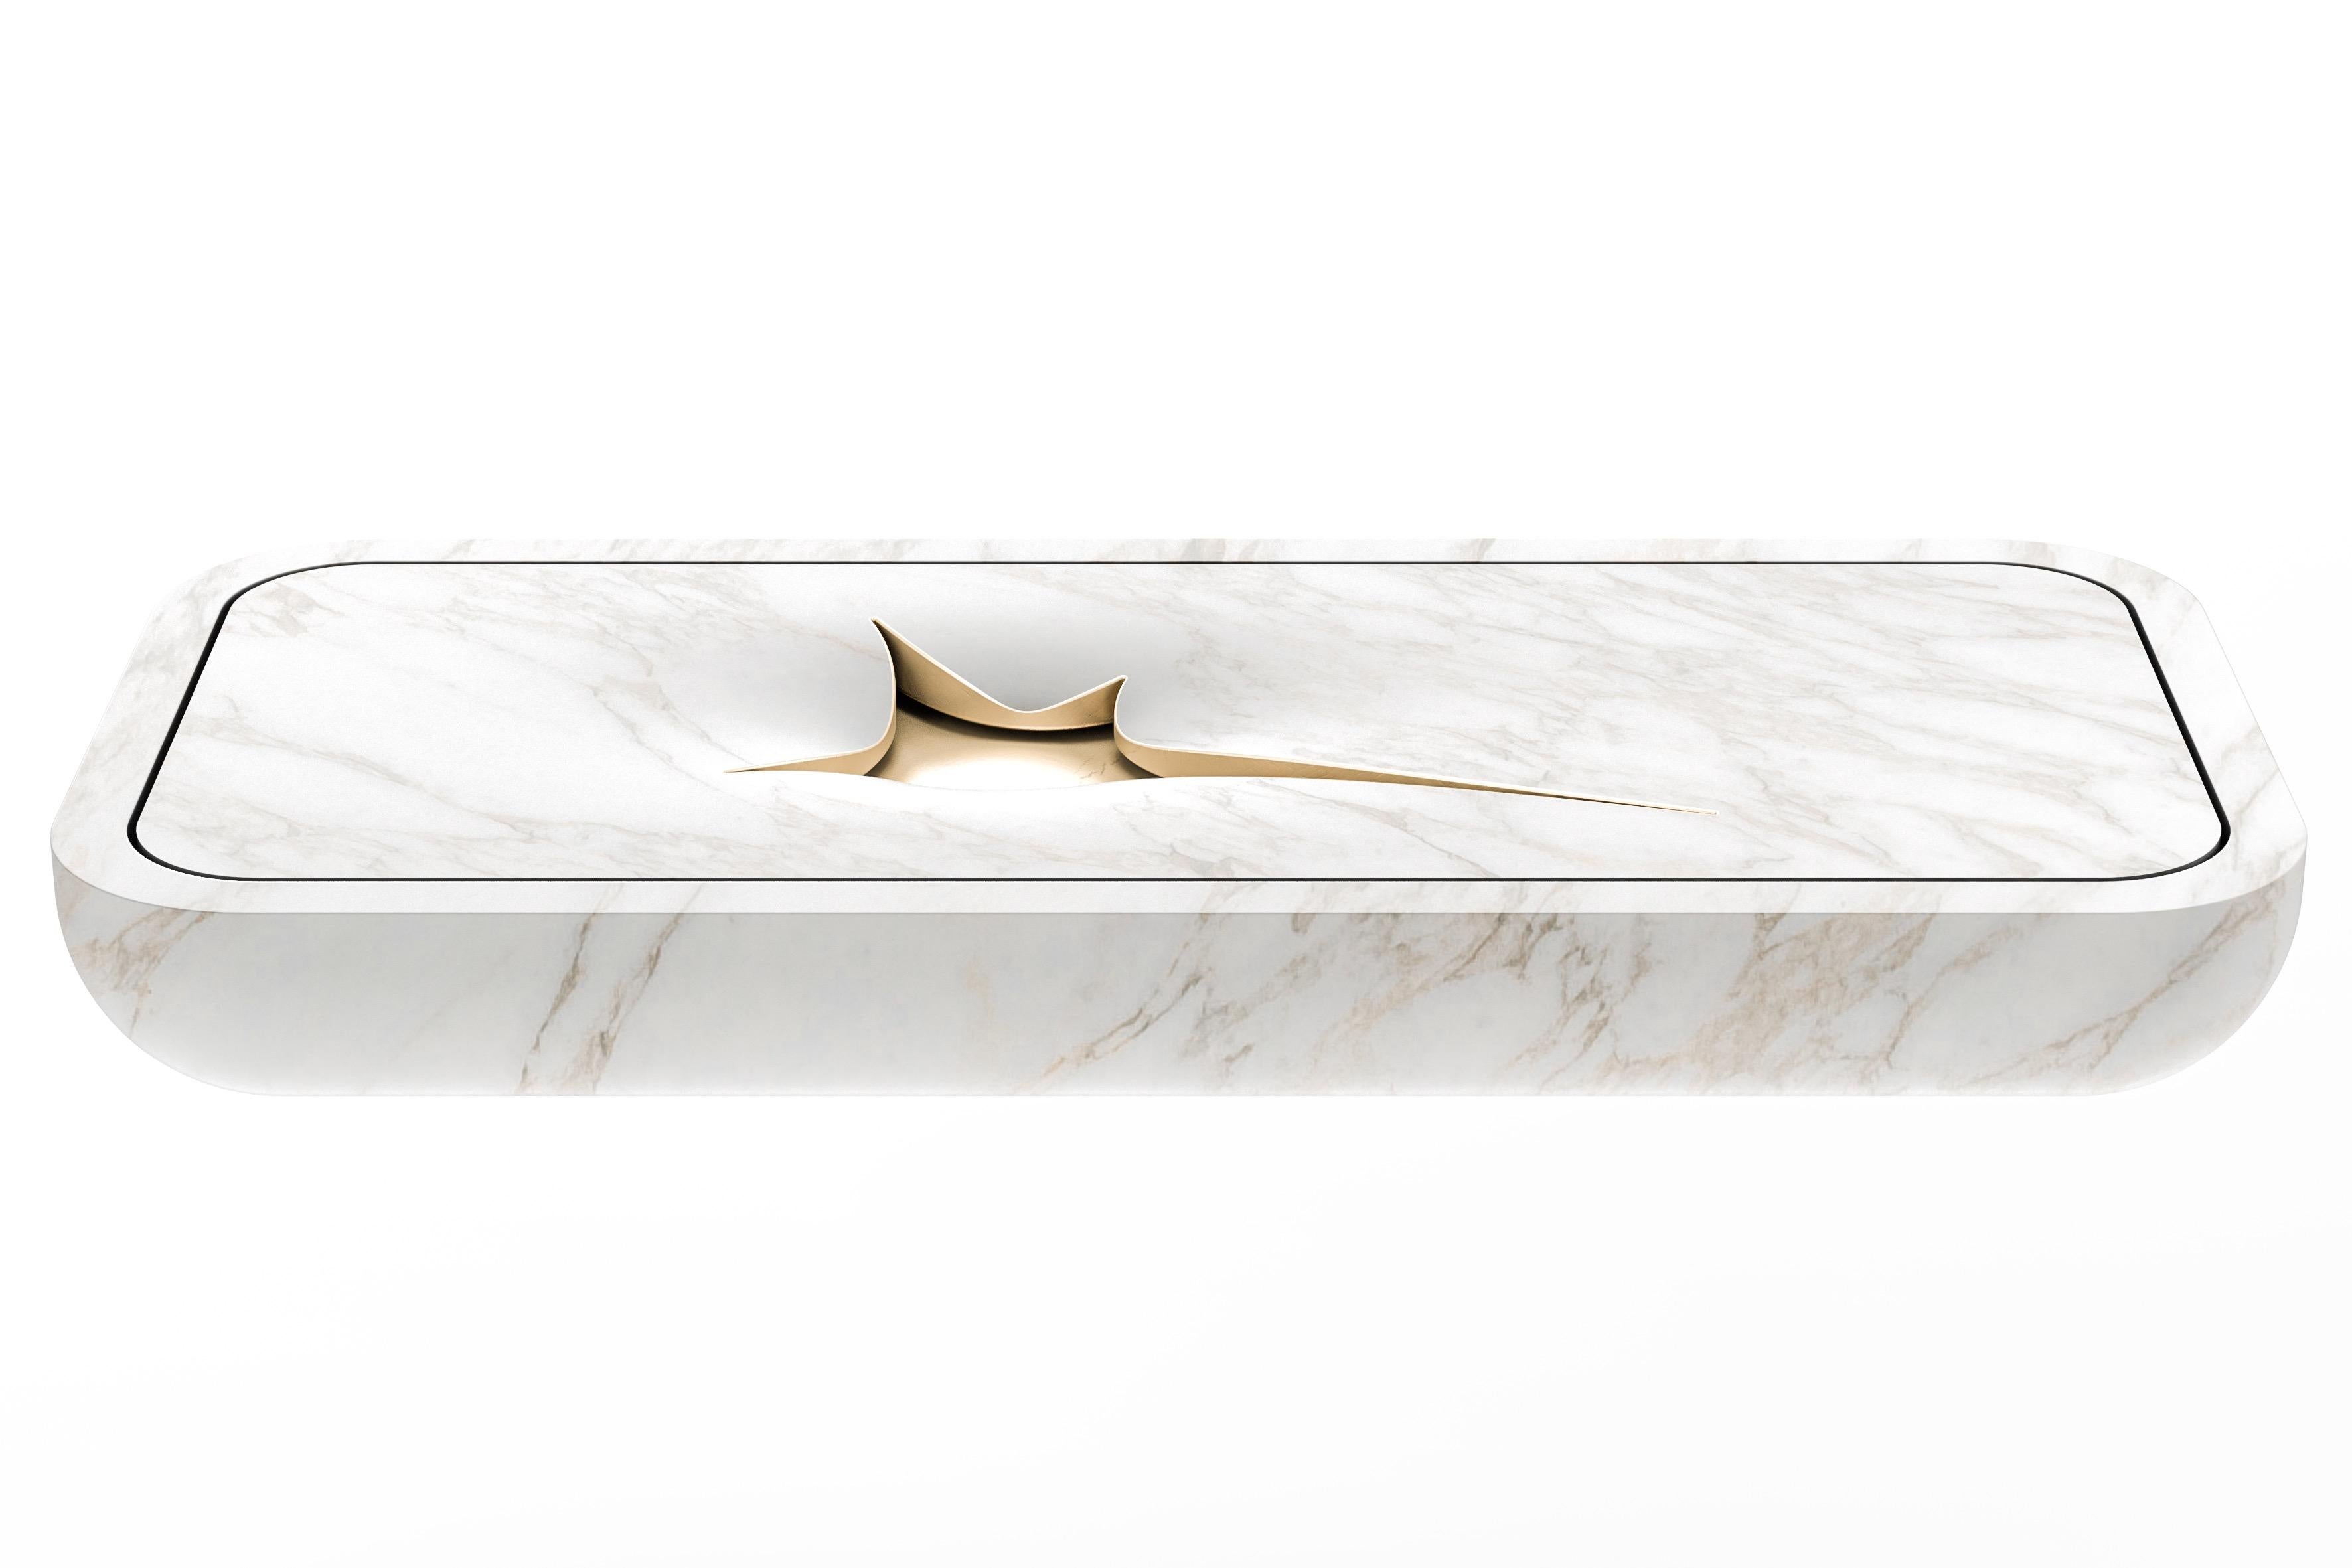 Abyss washbasin by Marmi Serafini
Materials: Calcatta Oro marble, gold leaf.
Dimensions: D 55 x W 120 x H 15 cm
Available in other marbles.

An iconic bathroom sink with a simple and minimal style characterized by a defined yet irregular cut that